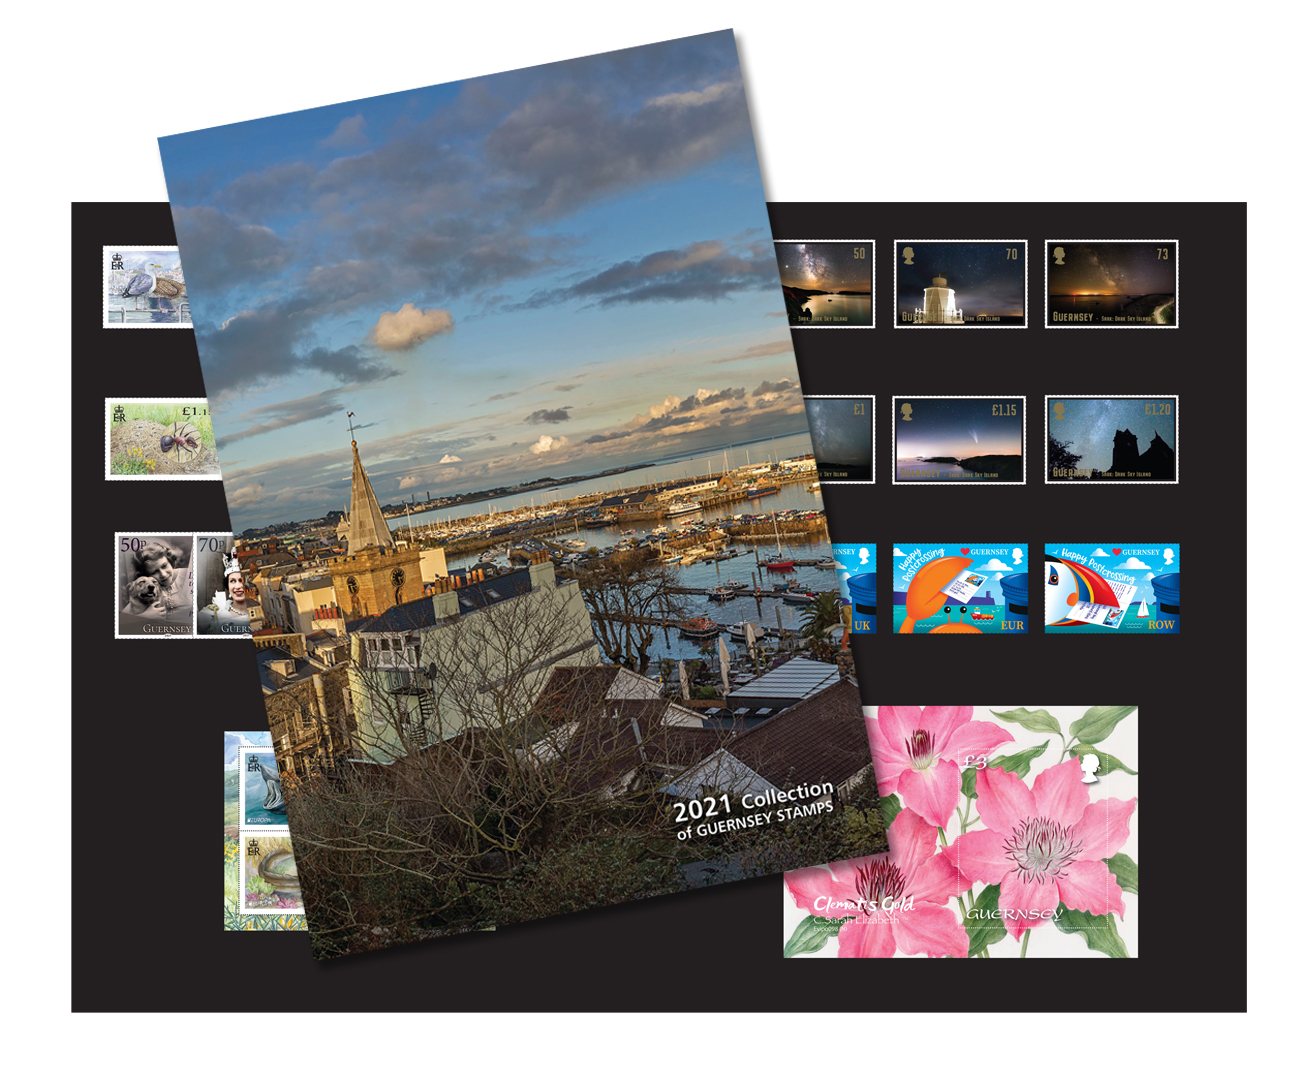 Guernsey celebrates a year of stamps with 2021 collection